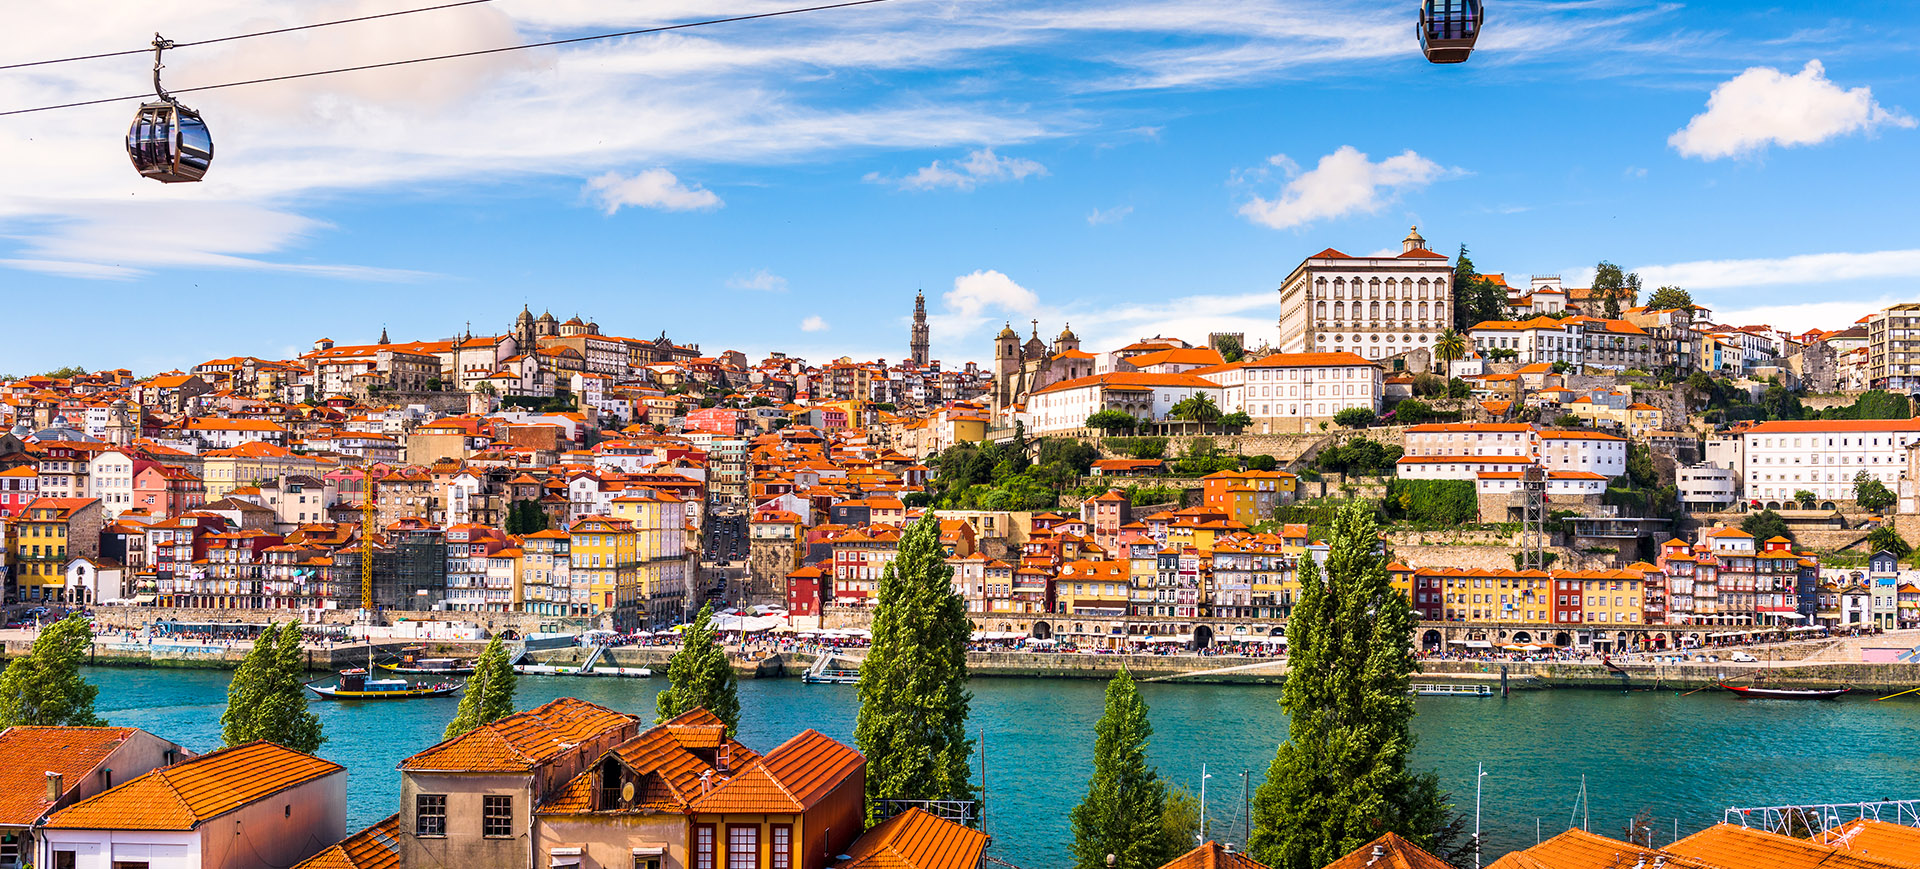 Forbes best places to live: Porto